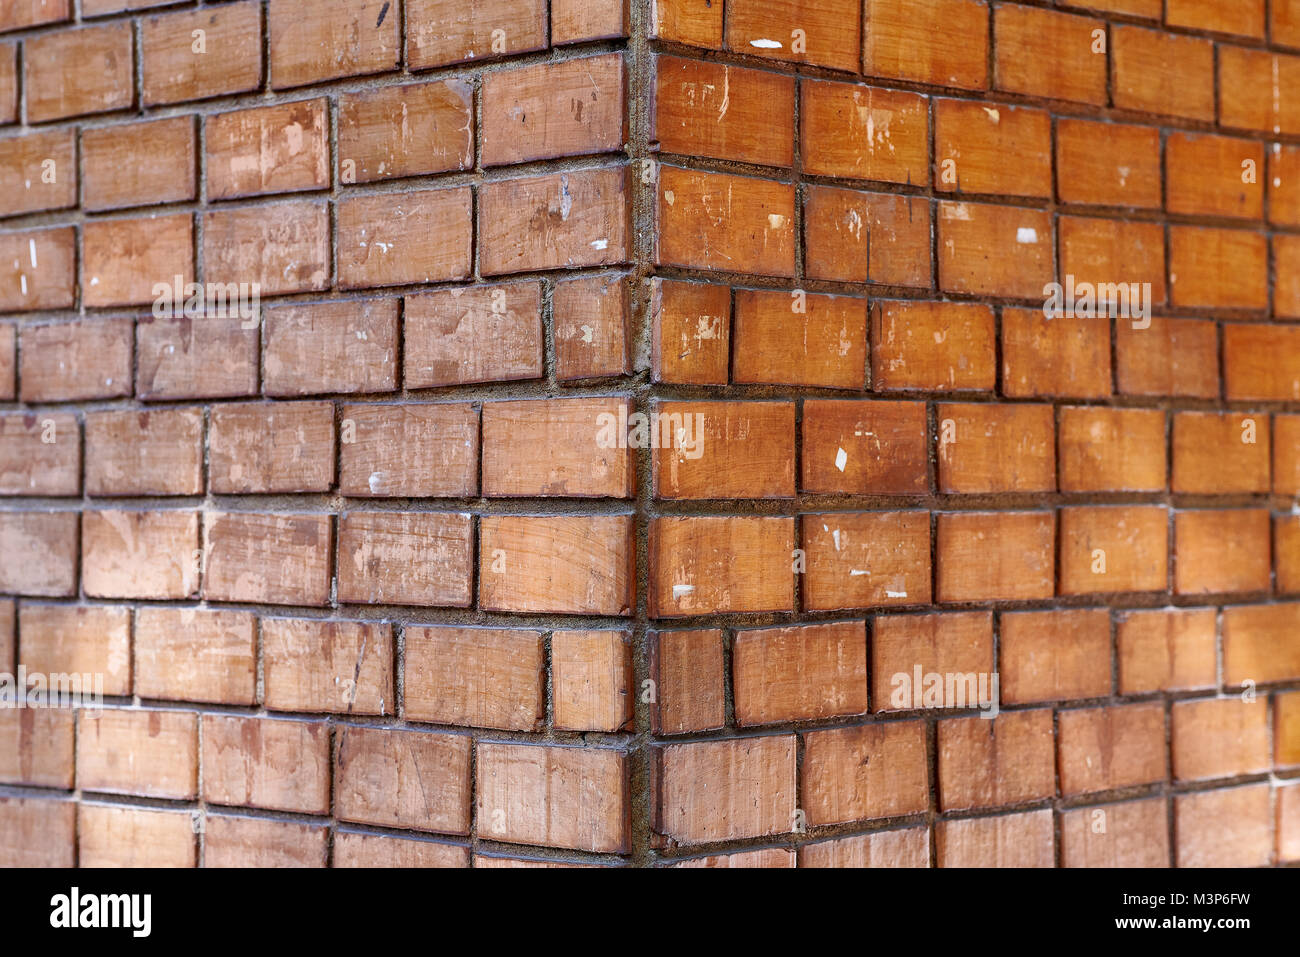 Two dimension of brick background wall Stock Photo